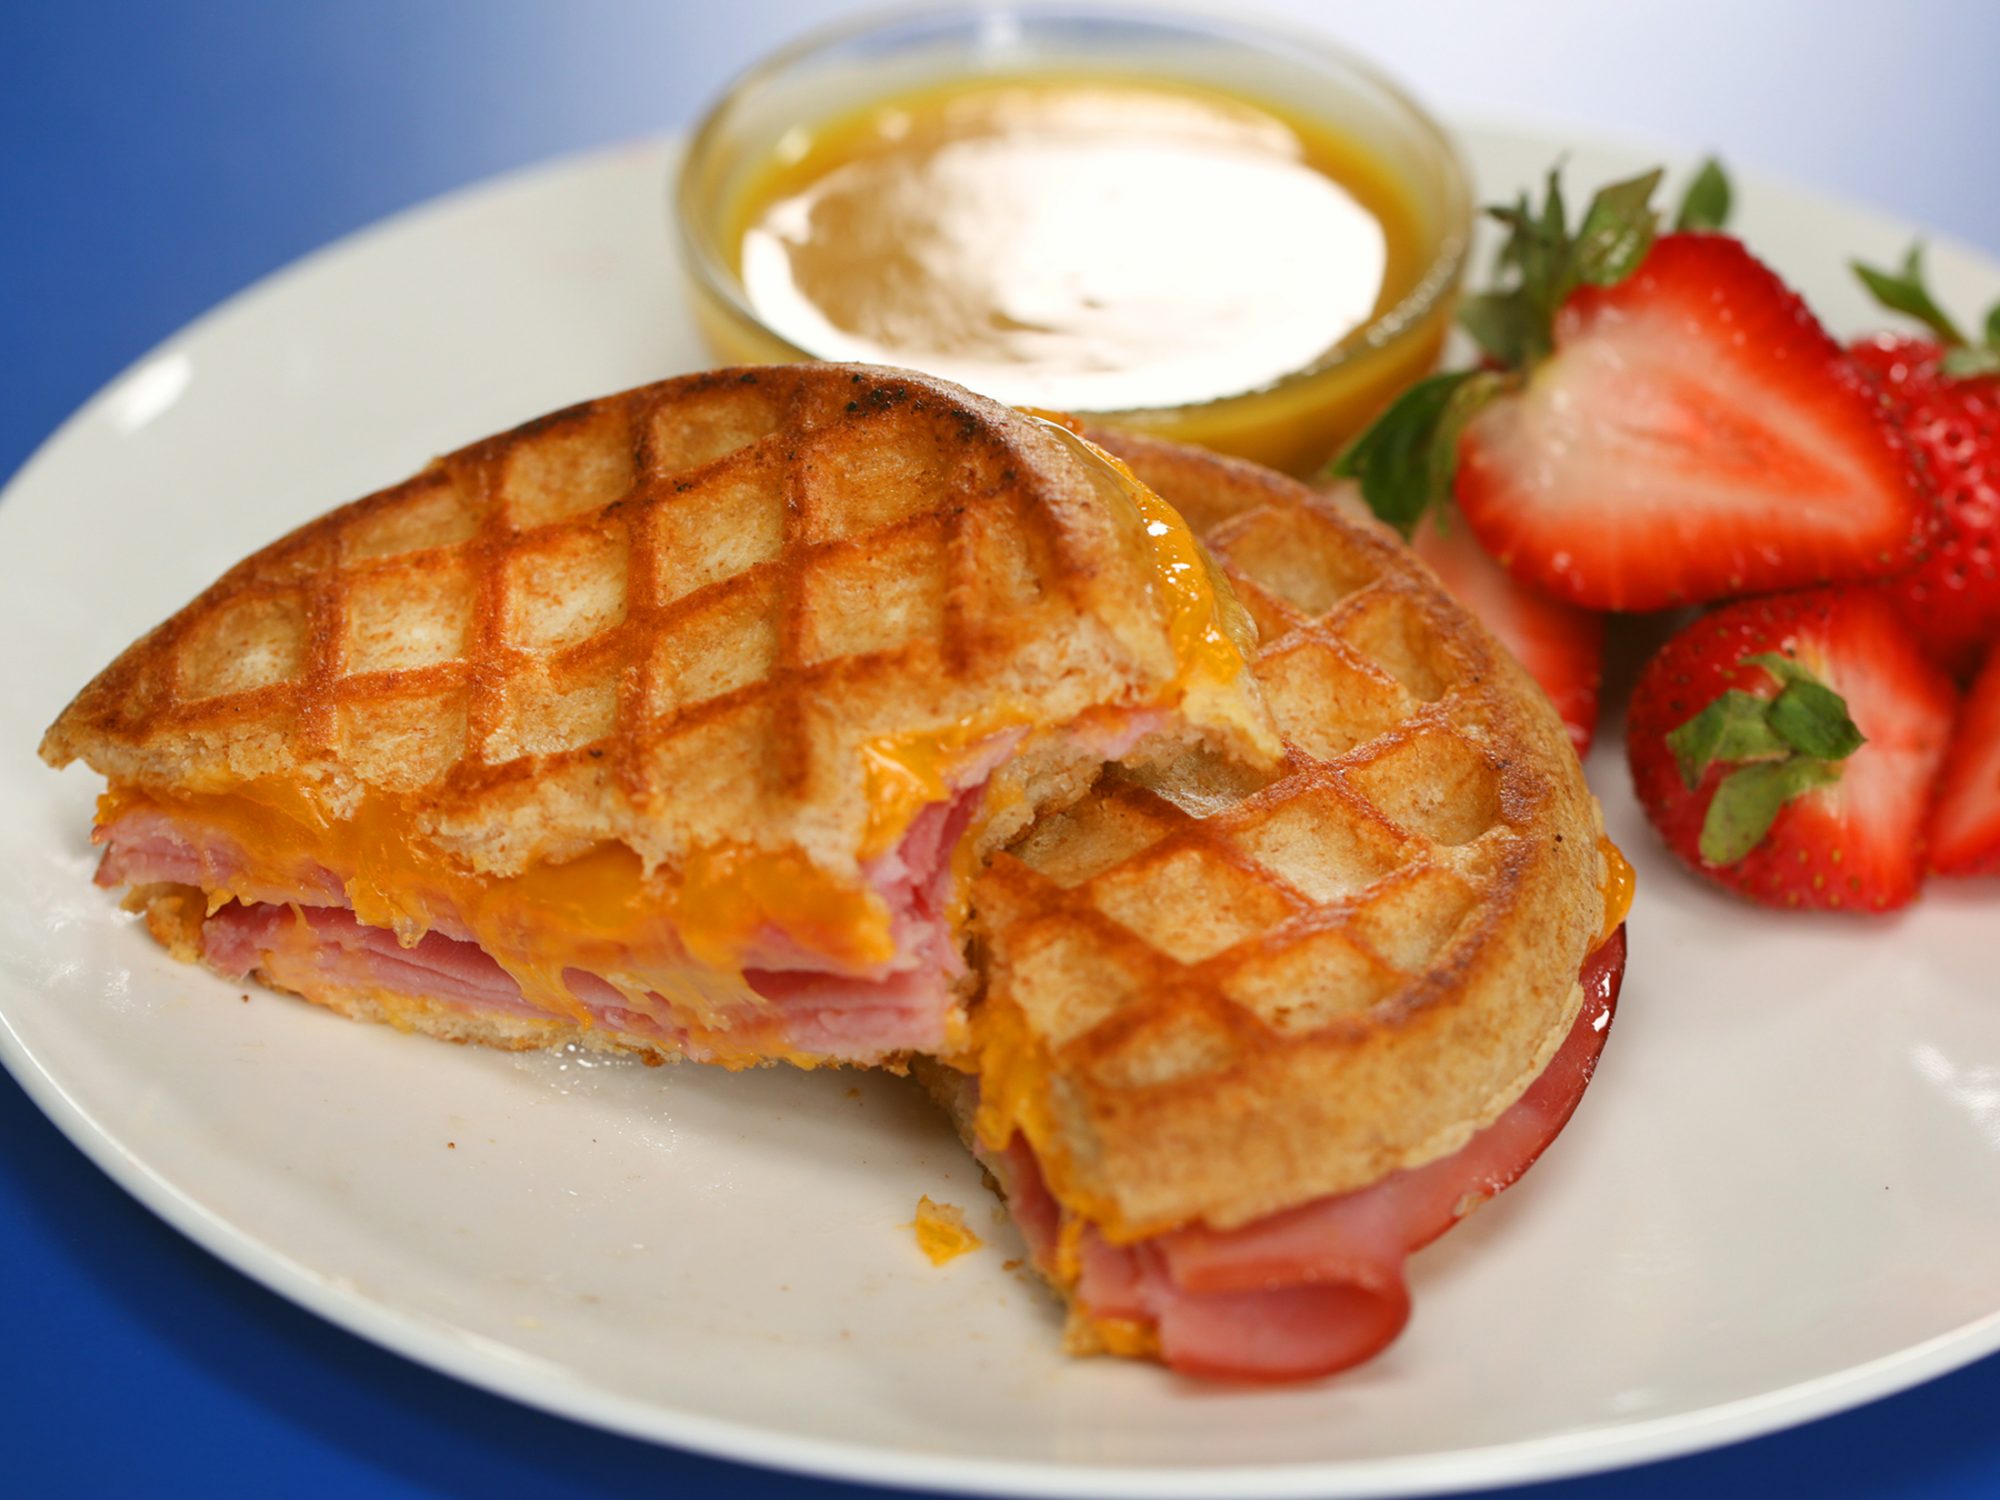 Grilled-Ham-and-cheese-DCMS-Large.jpg